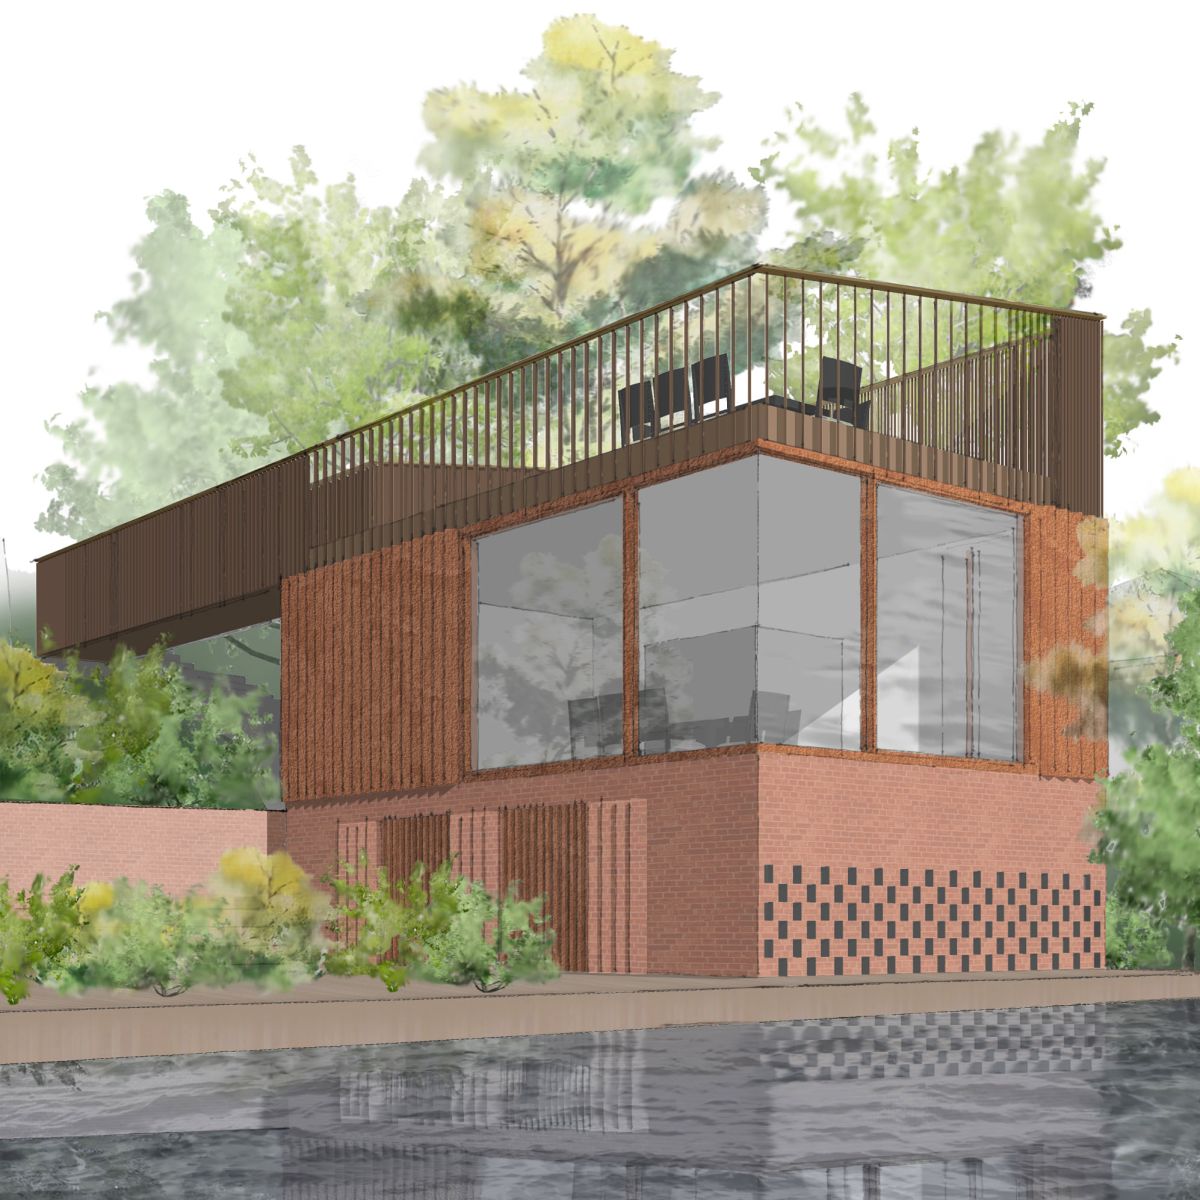 Thames-side Teahouse planning approved